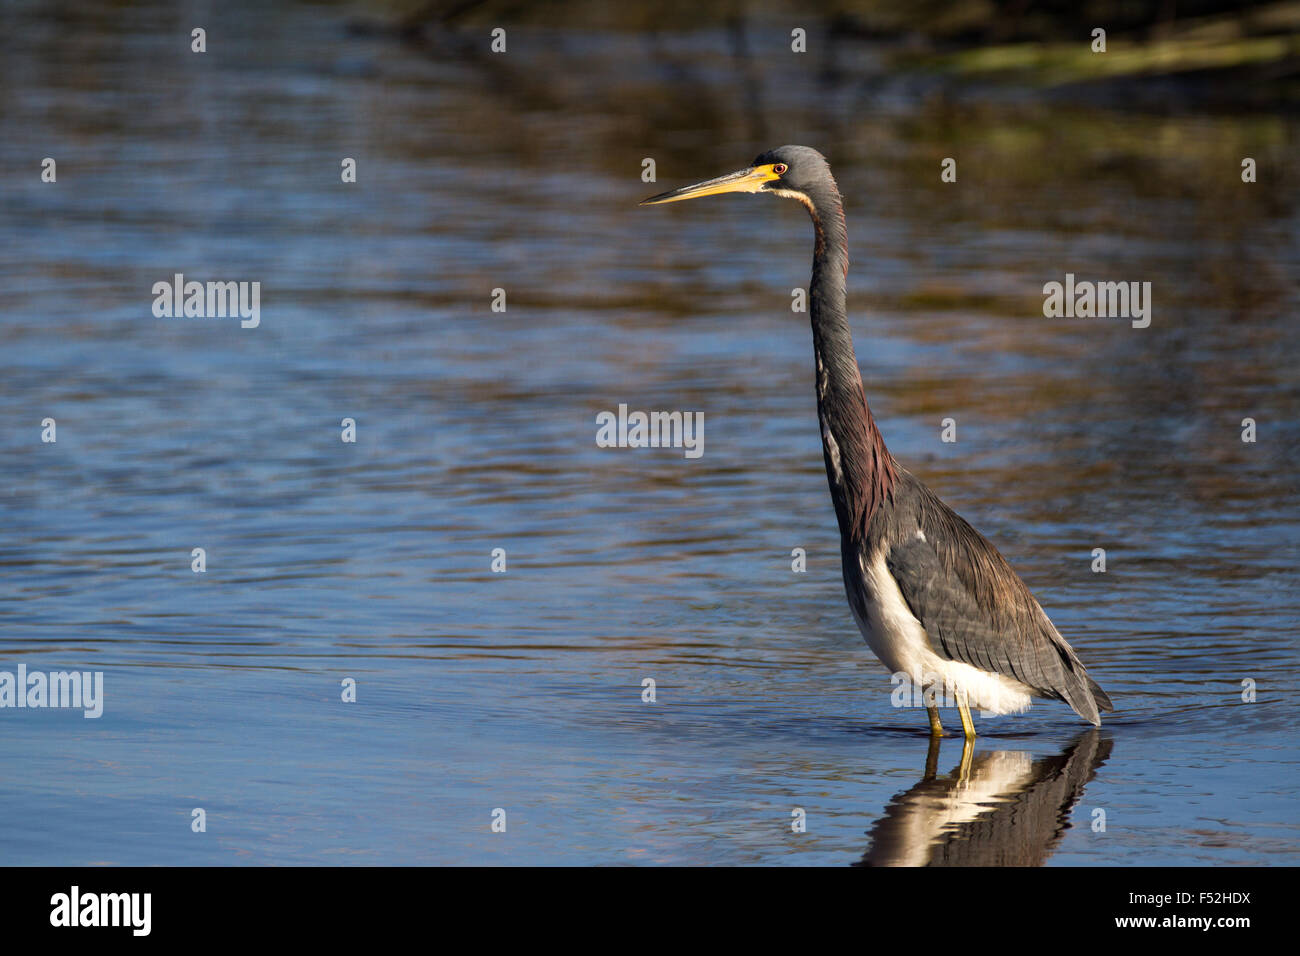 A tricolored heron craning his neck during a hunt Stock Photo